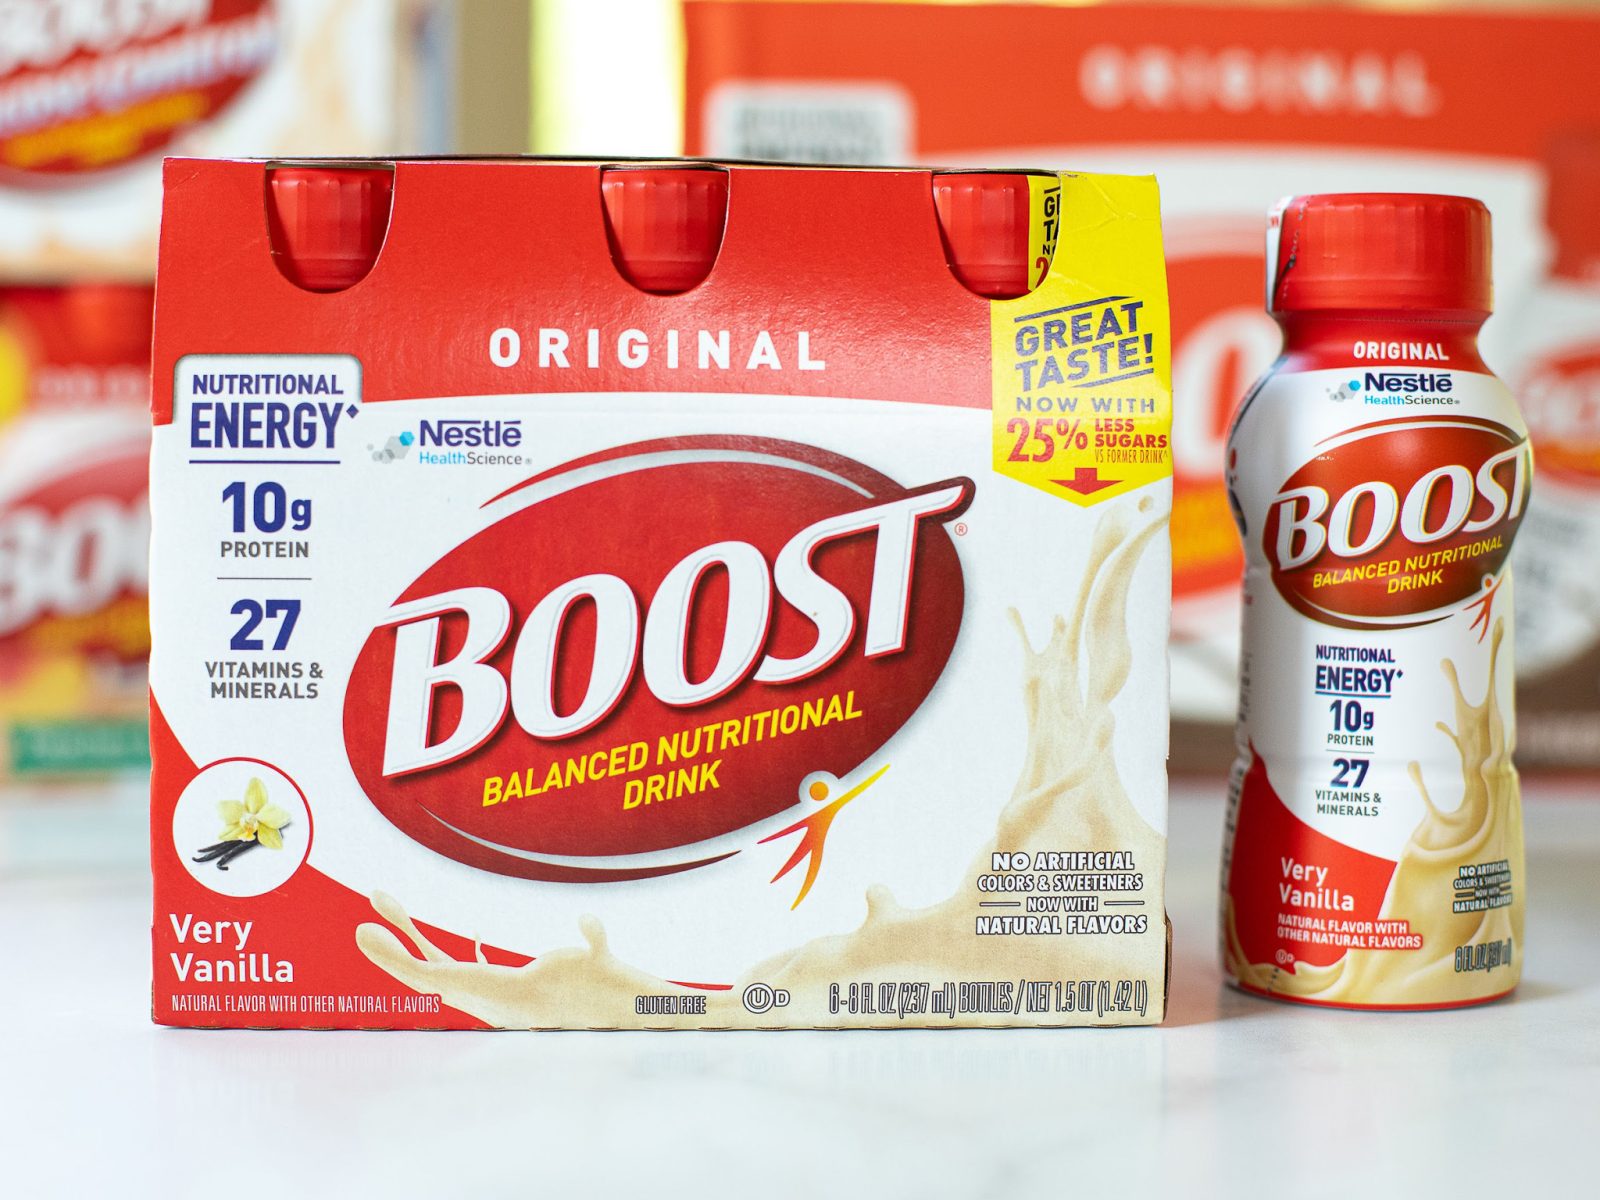 Boost Nutritional Drink As Low As $4.99 At Kroger